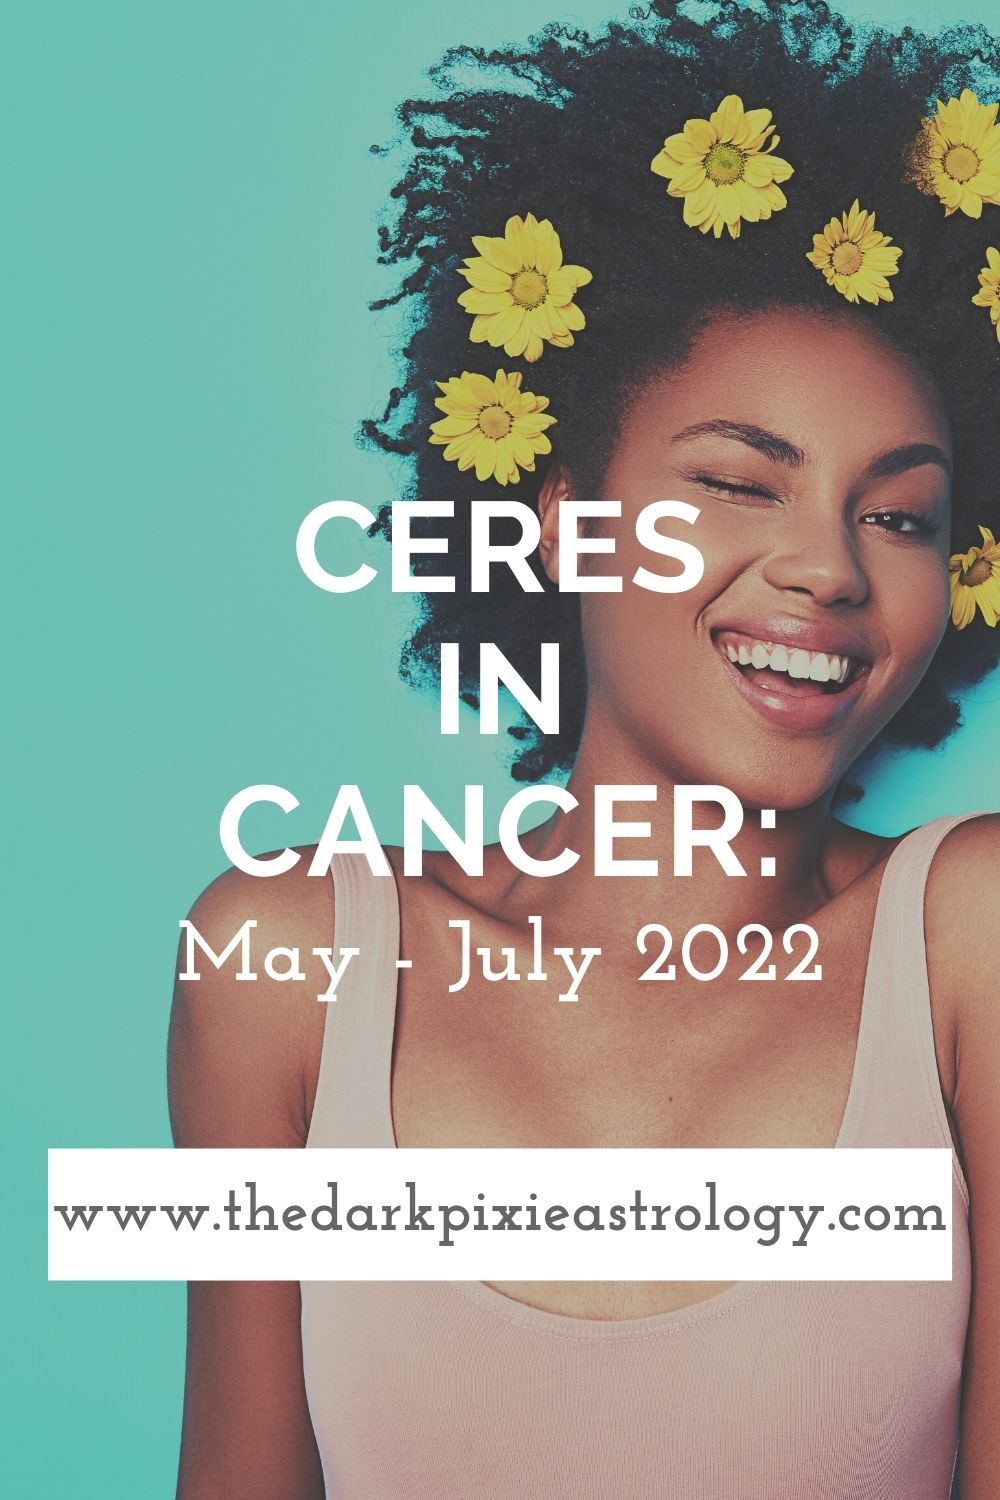 Ceres in Cancer: May - July 2022 - The Dark Pixie Astrology